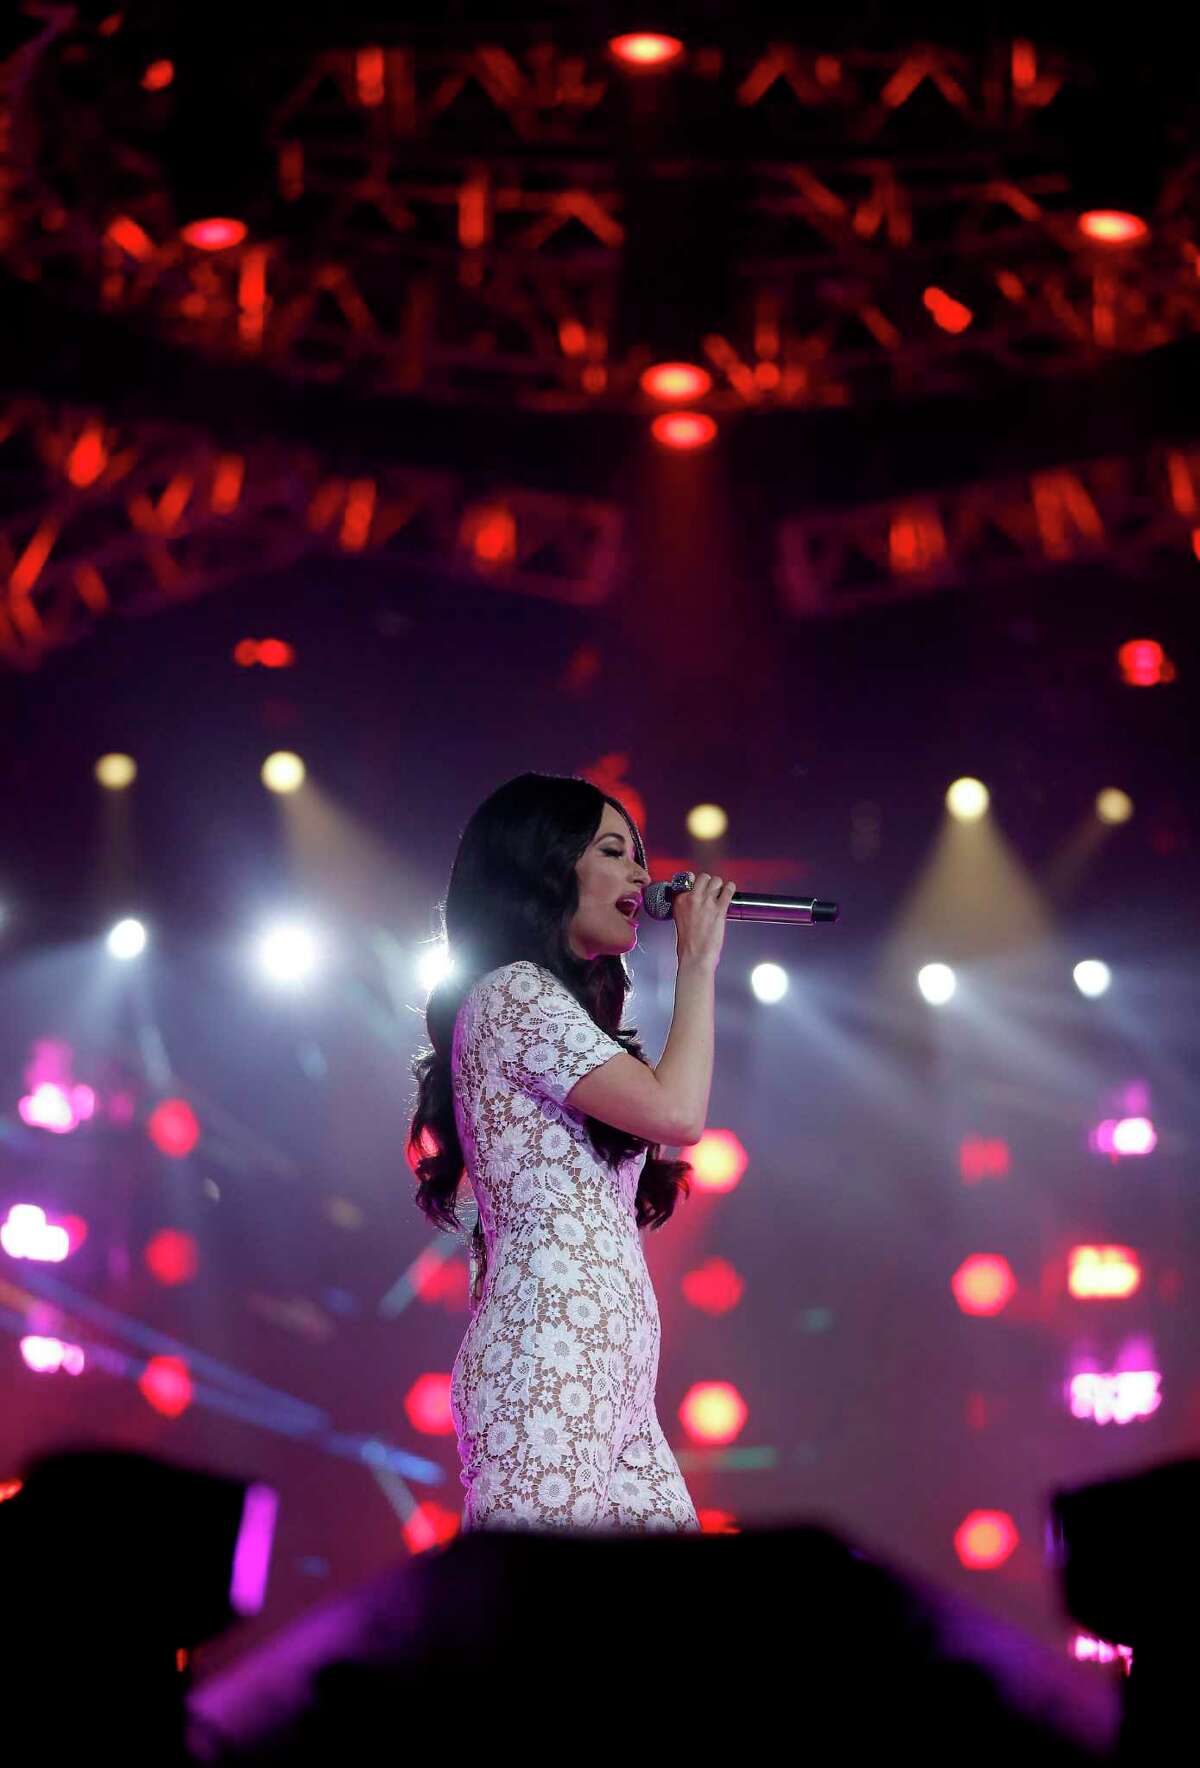 Kacey Musgraves performs during the Houston Livestock Show and Rodeo at NRG Stadium, Monday, Feb. 25, 2019, in Houston.